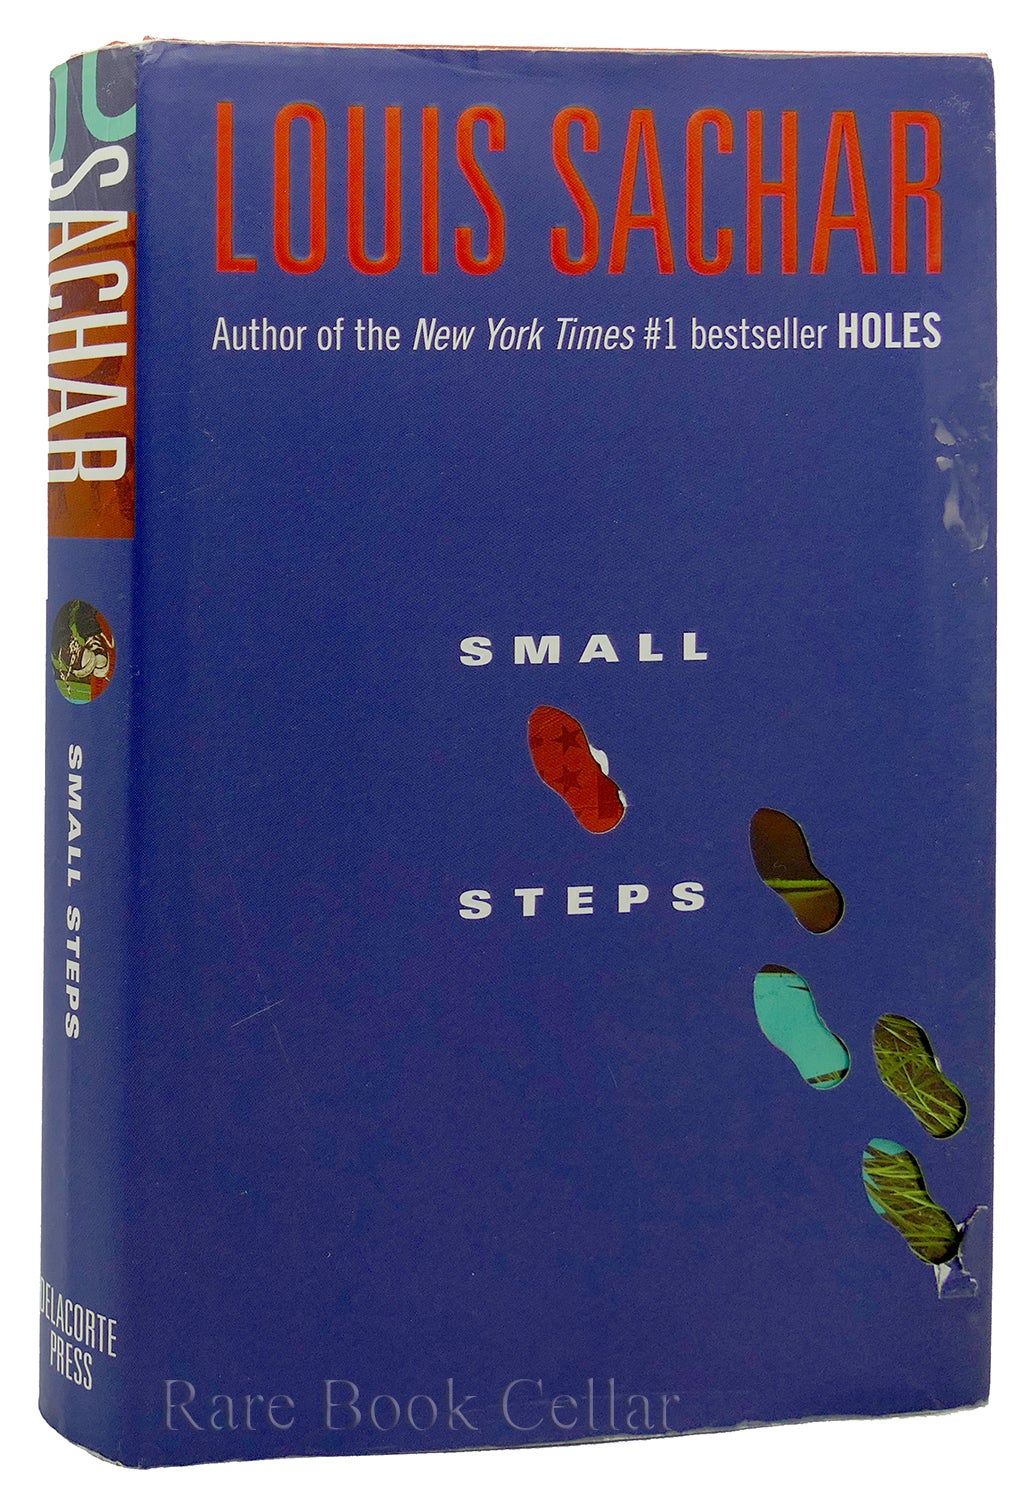 Small Steps by Louis Sachar, Paperback